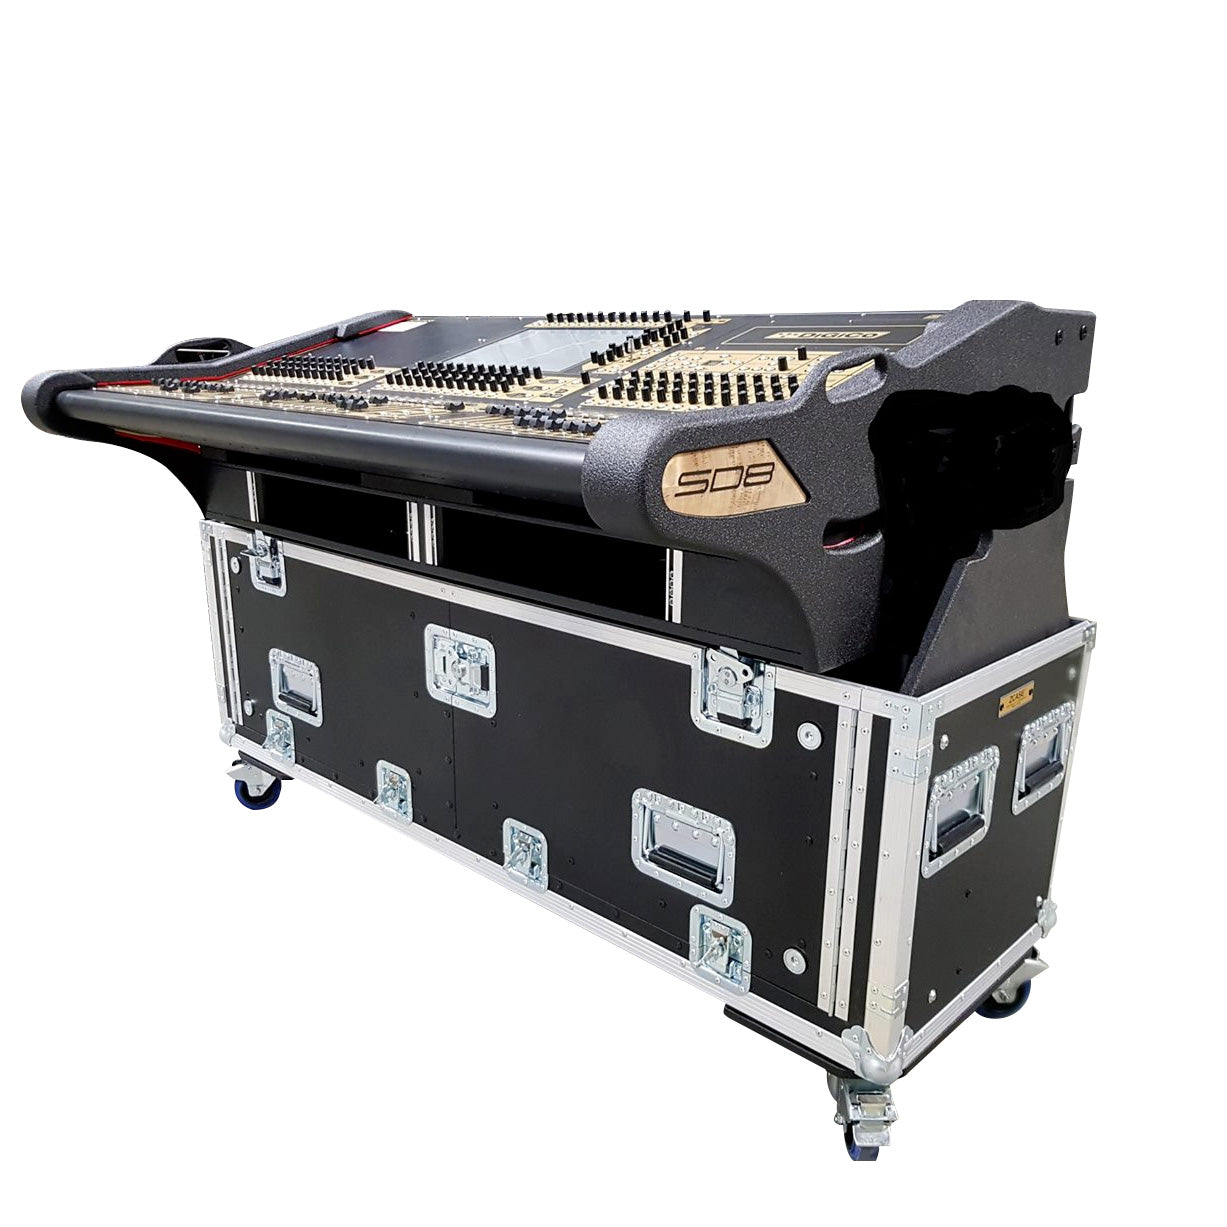 Pro X Flip-Ready Detachable Easy Retracting Hydraulic Lift Case With 2x2U for Digico SD8 Digital Mixing Console by ZCase® XZF-DIG-SD8 D 2x2U